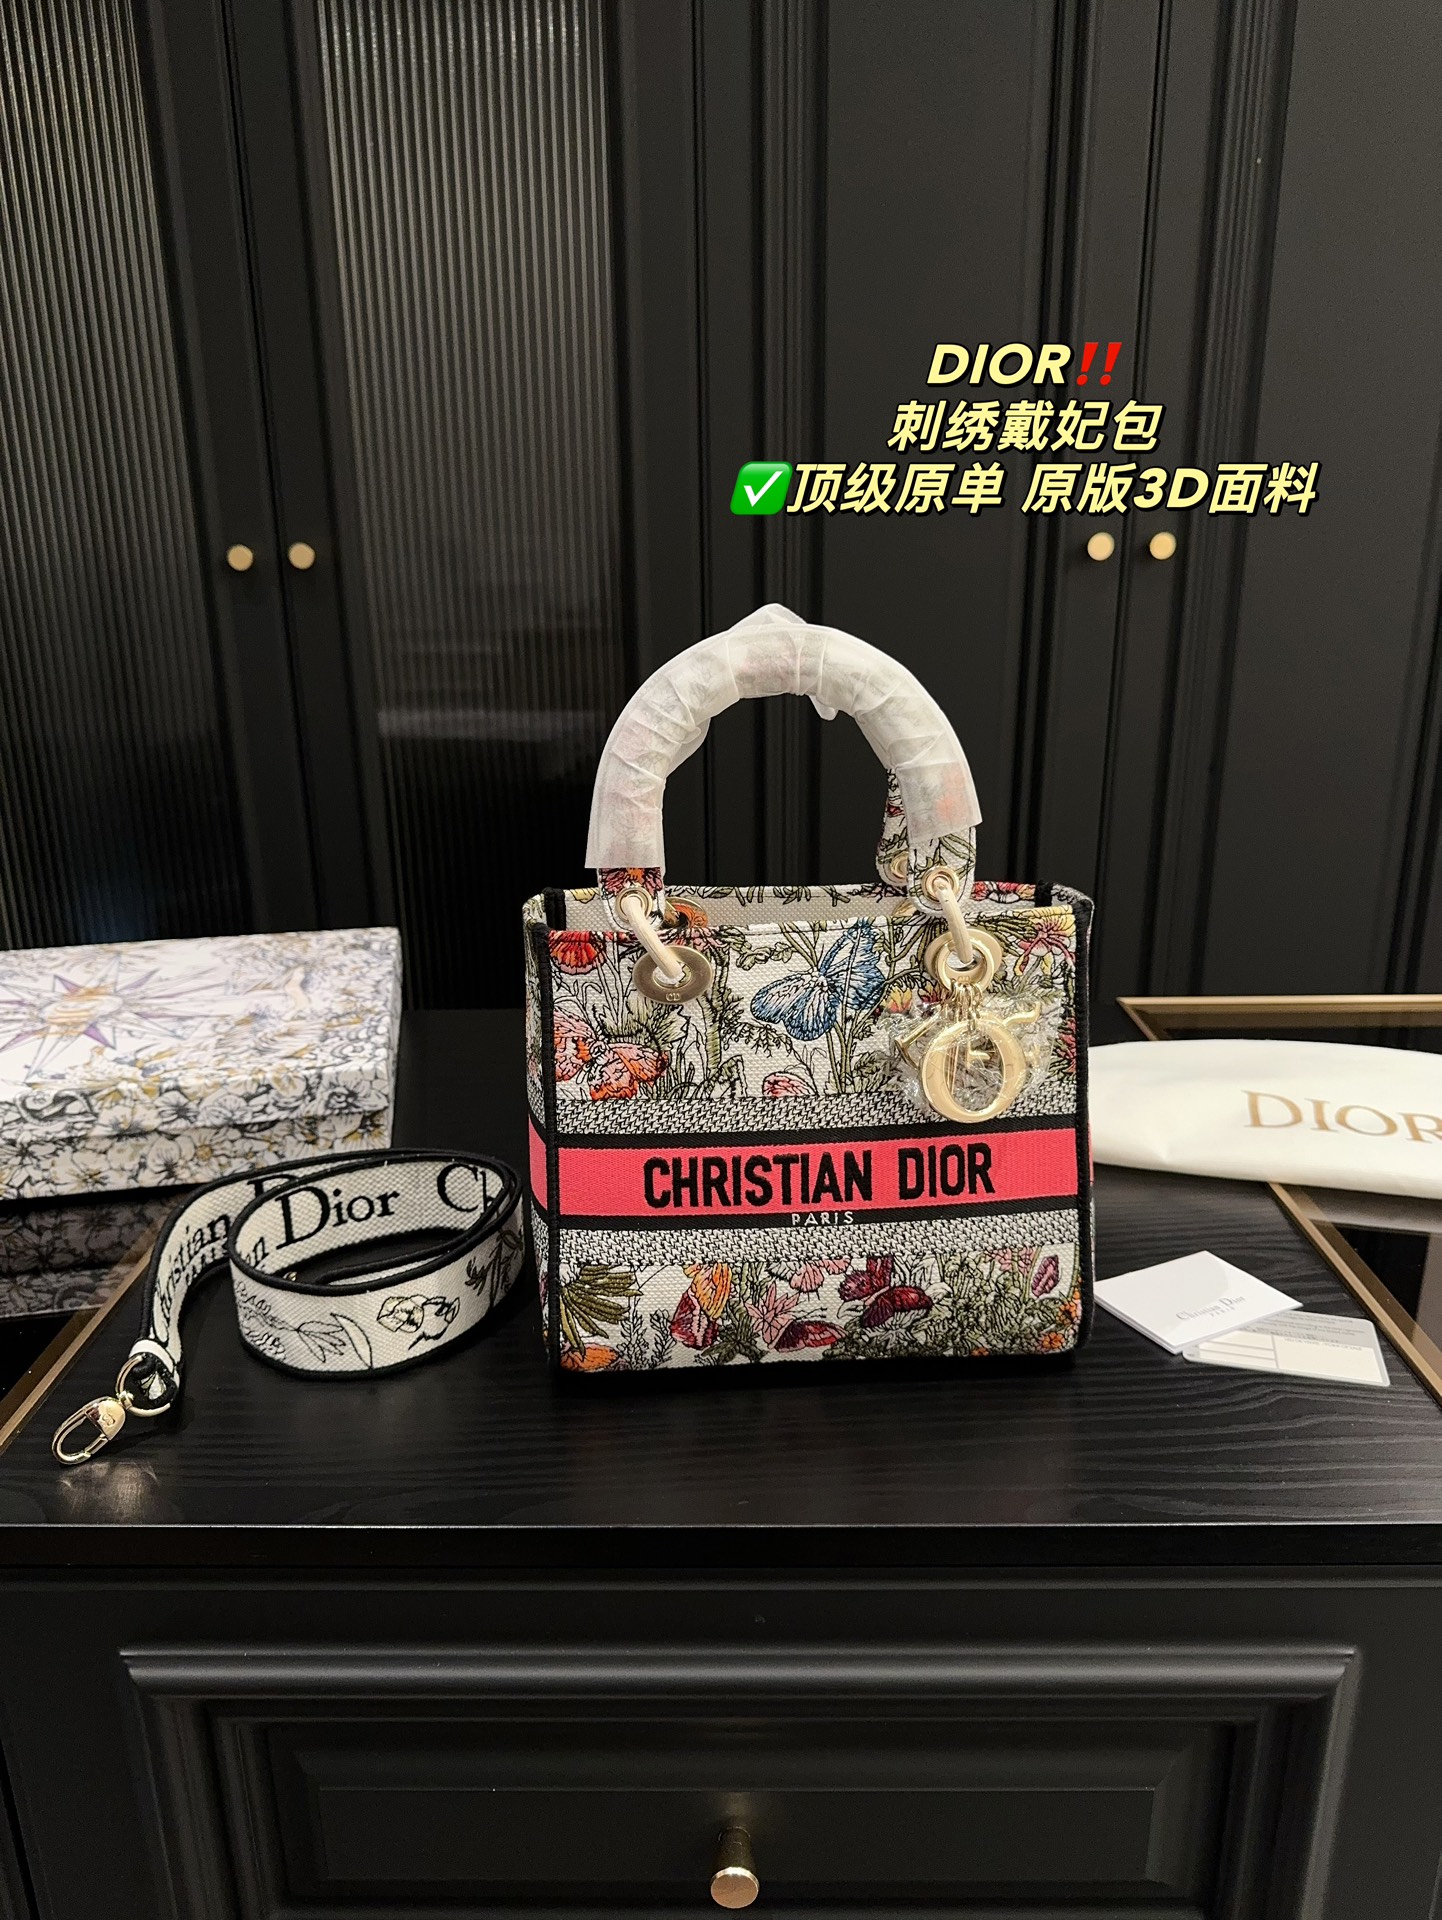 We Offer
 Dior Lady Handbags Crossbody & Shoulder Bags Embroidery